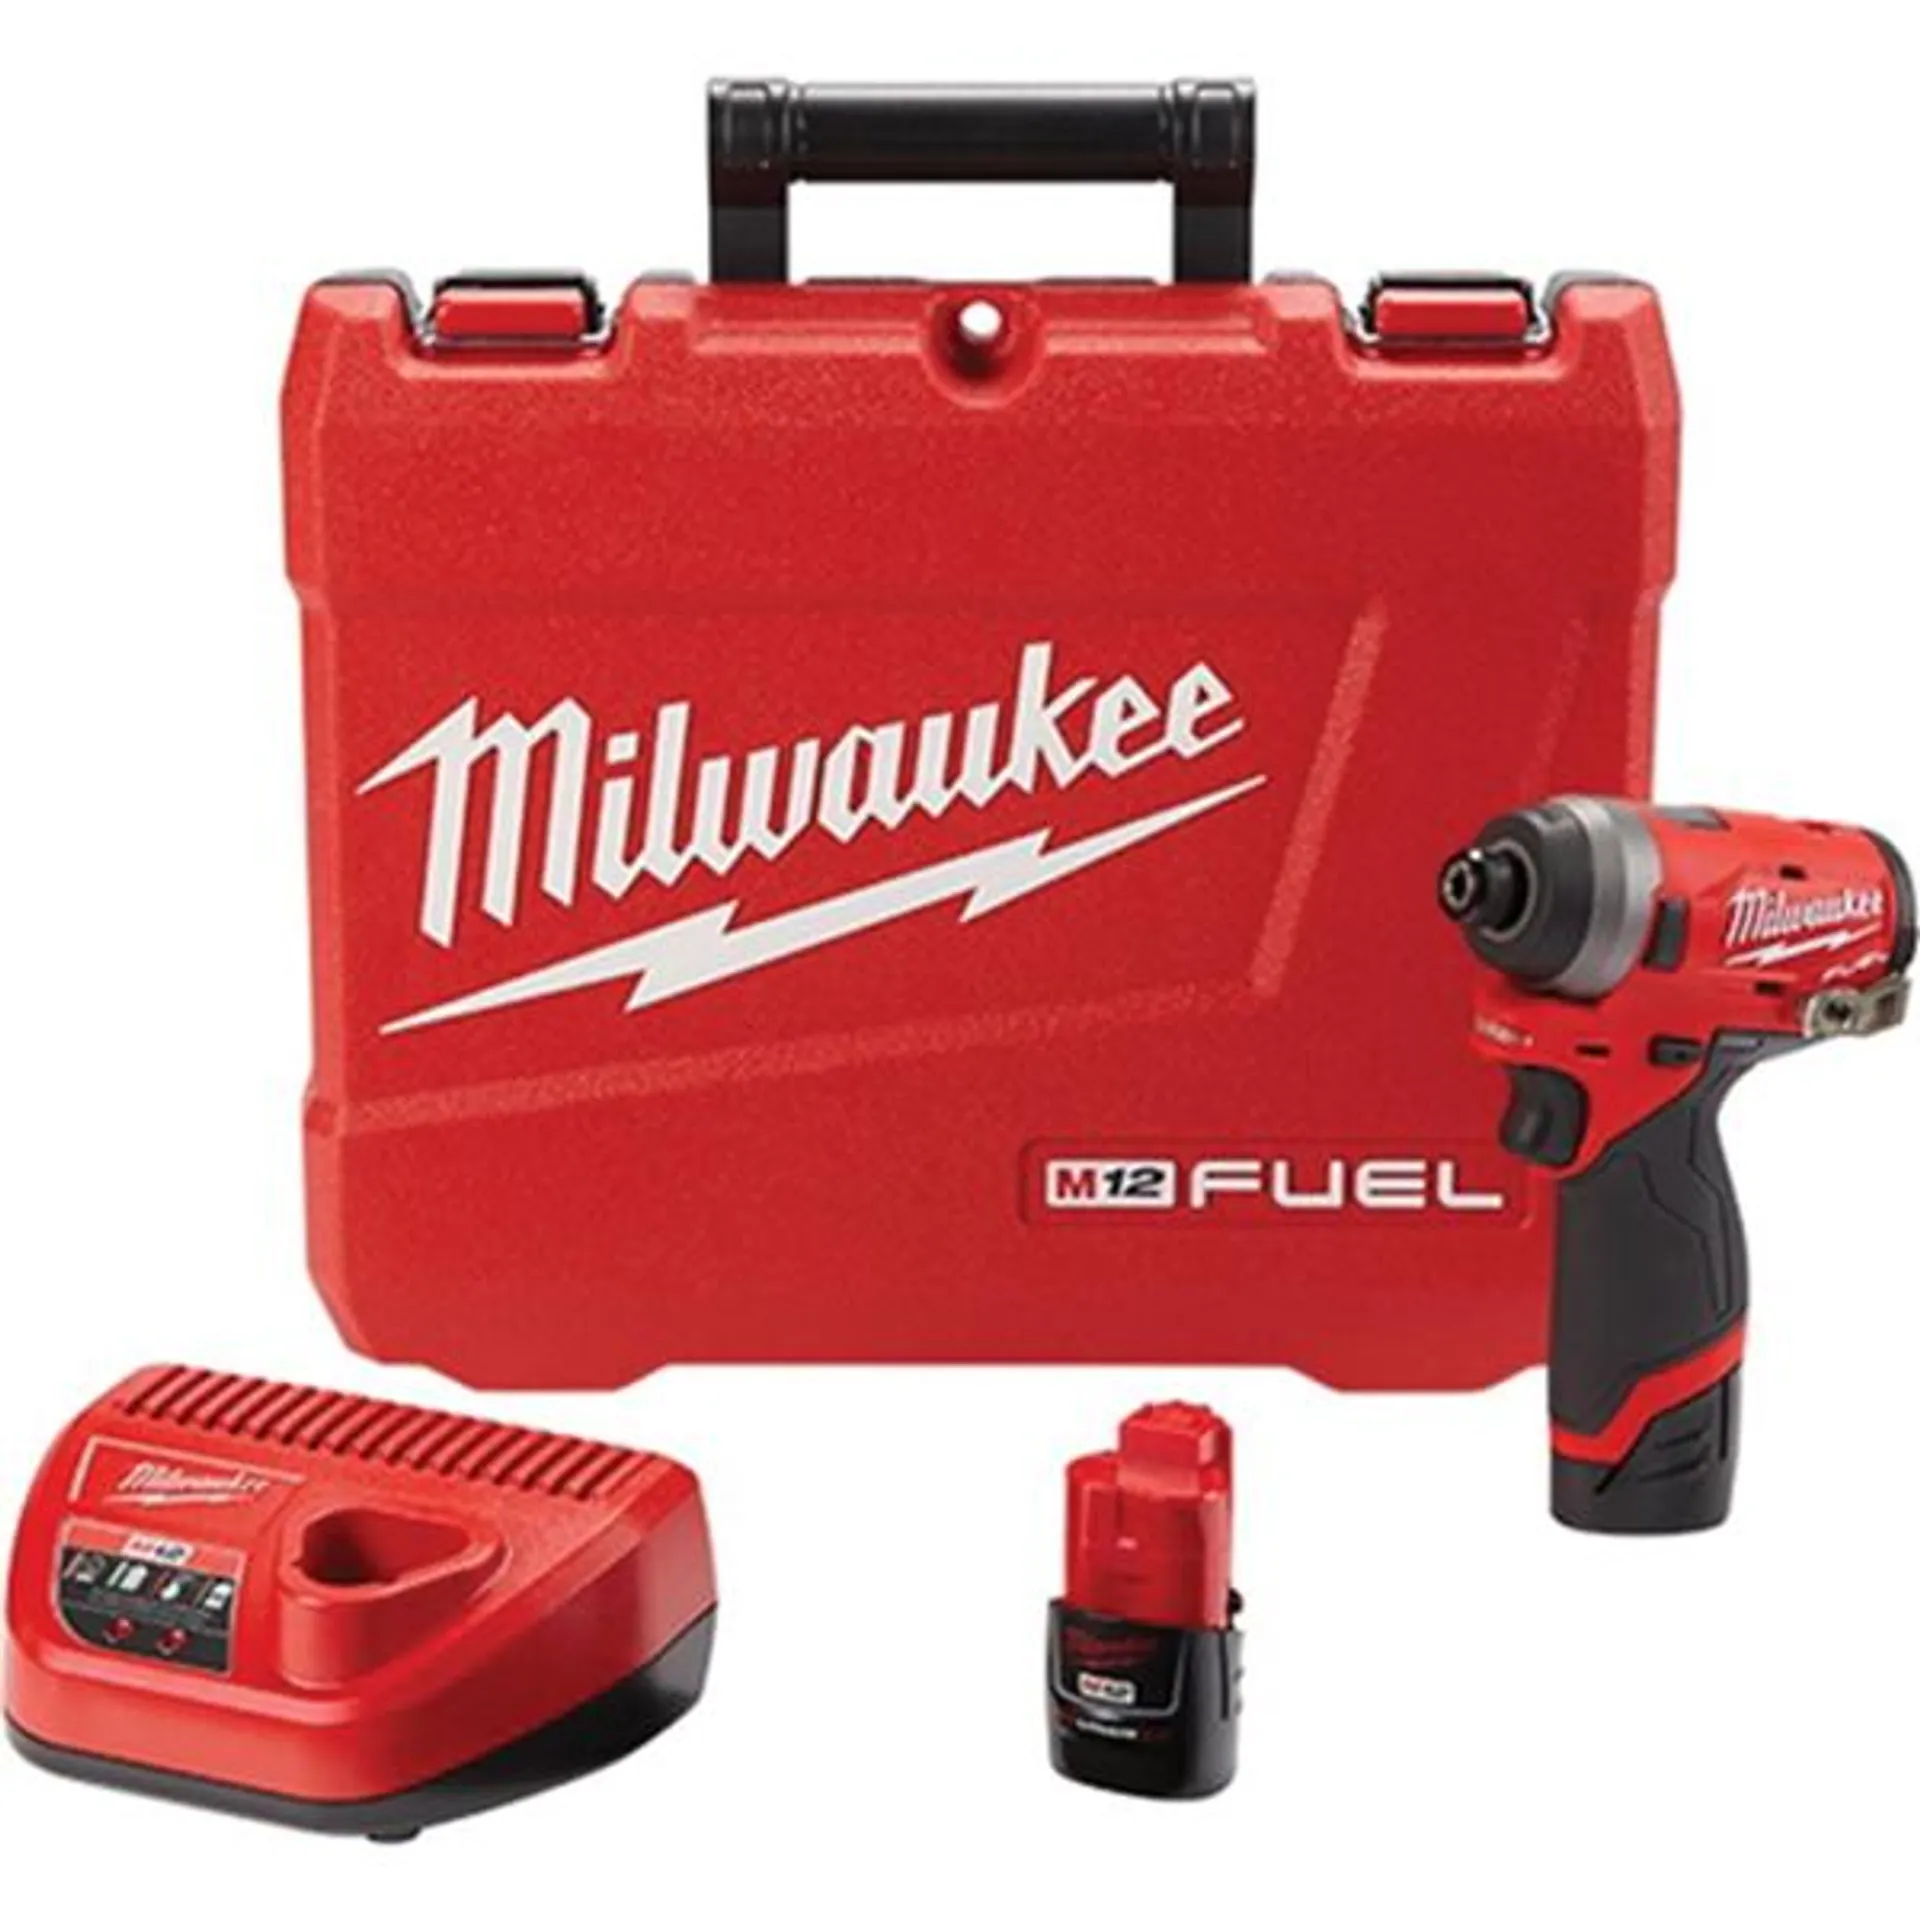 2553-22 Impact Driver Kit, Battery Included, 12 V, 2 Ah, 1/4 in Drive, Hex Drive, 4000 ipm